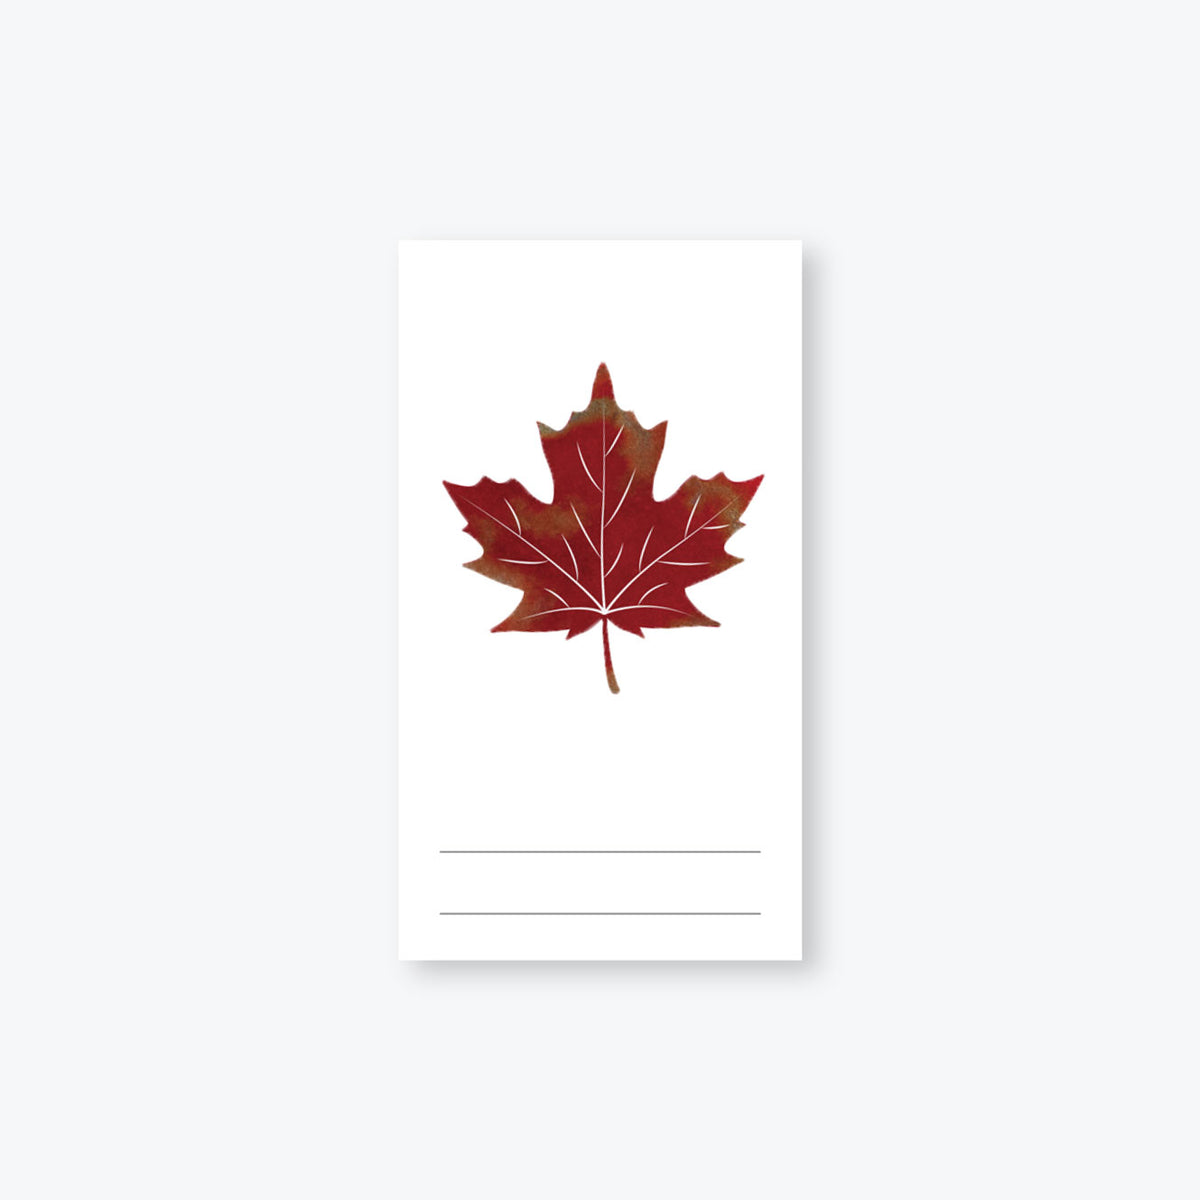 Wearingeul - Ink Swatch Cards - Maple Leaf